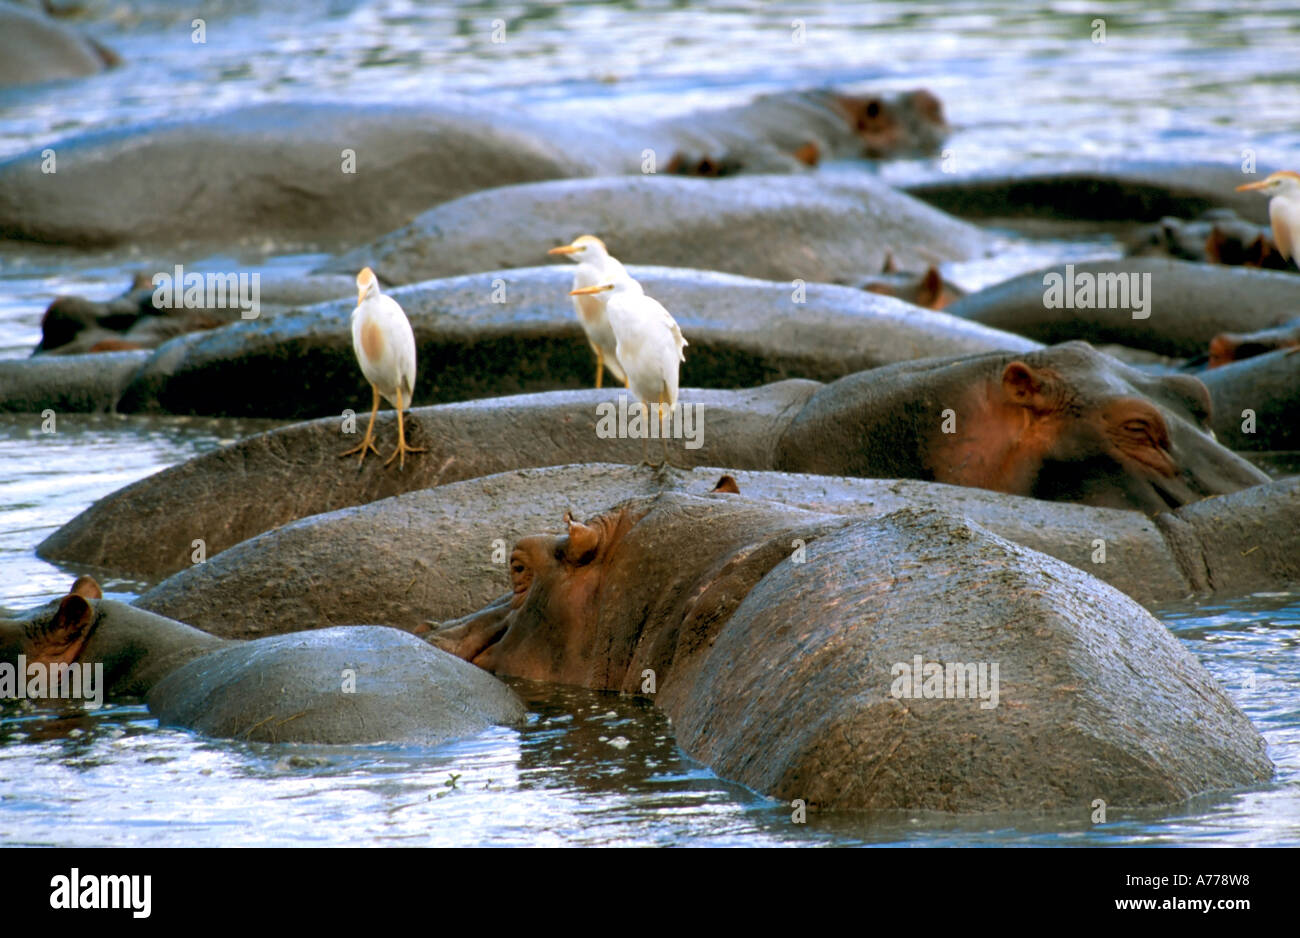 Hippopotami semi submerged in a water hole with cattle egrets perched on their backs at a water hole. Stock Photo